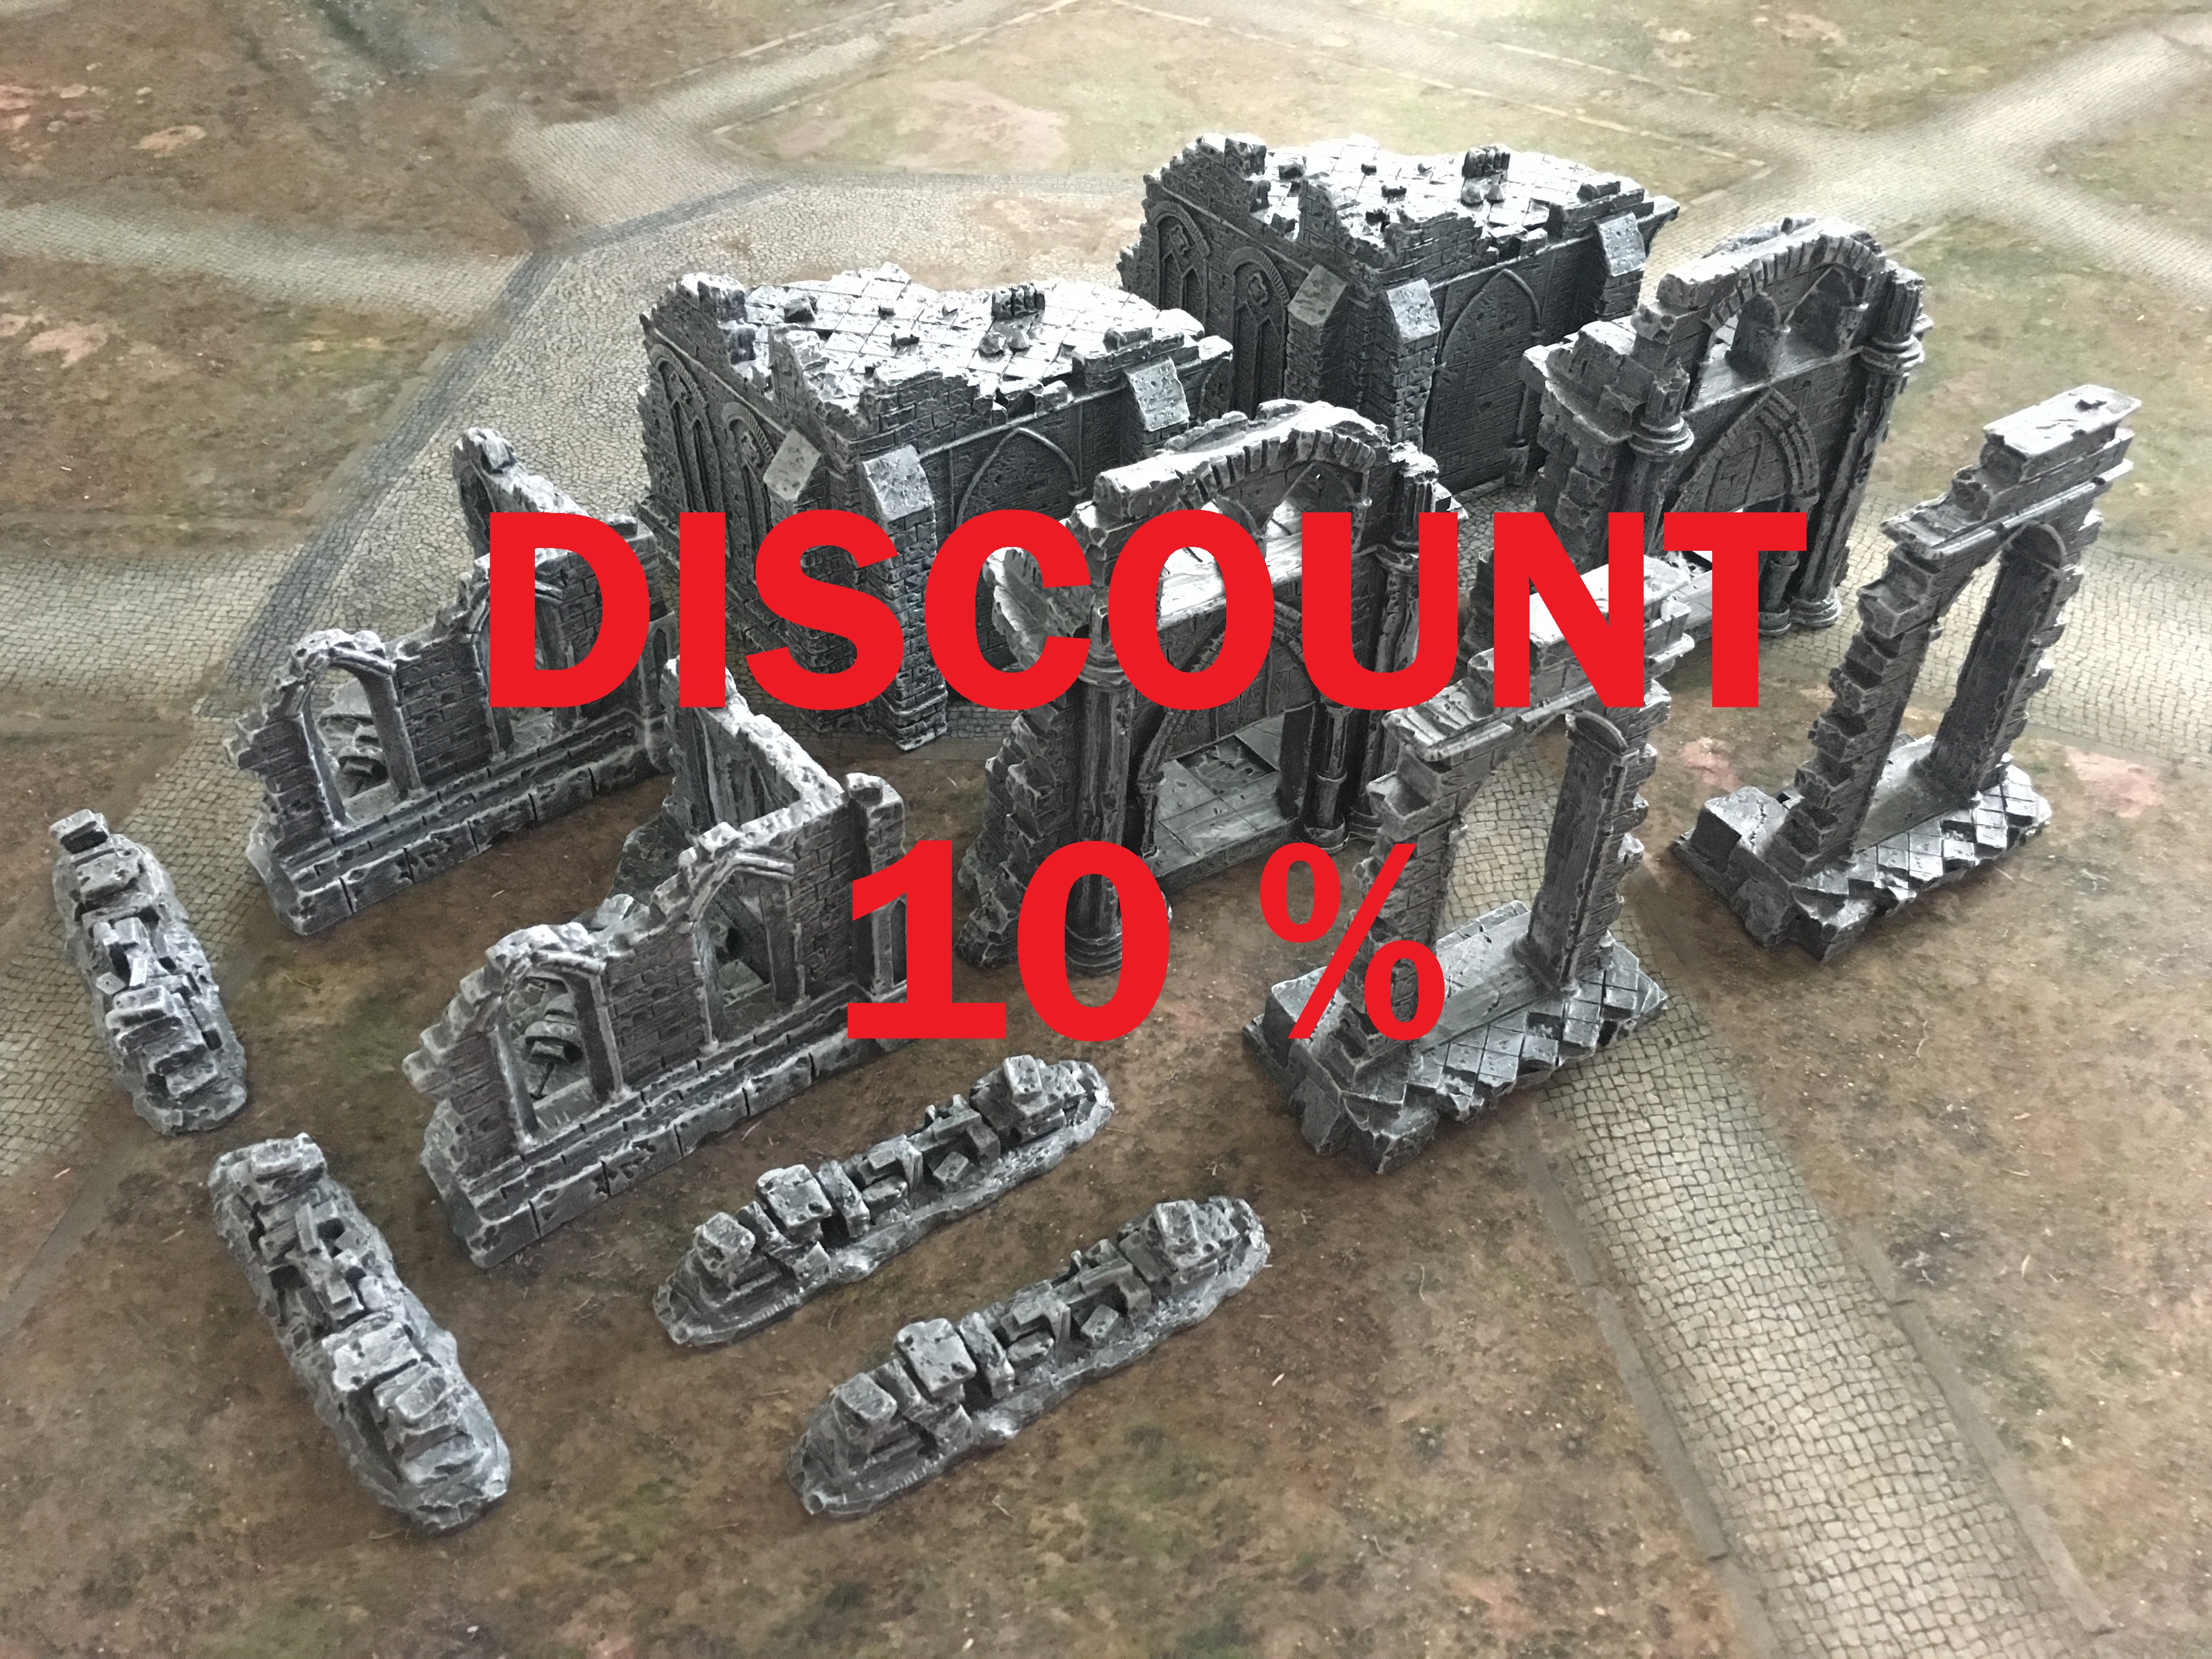 10 % DISCOUNT on 12 pcs of ready-to-play terrain set